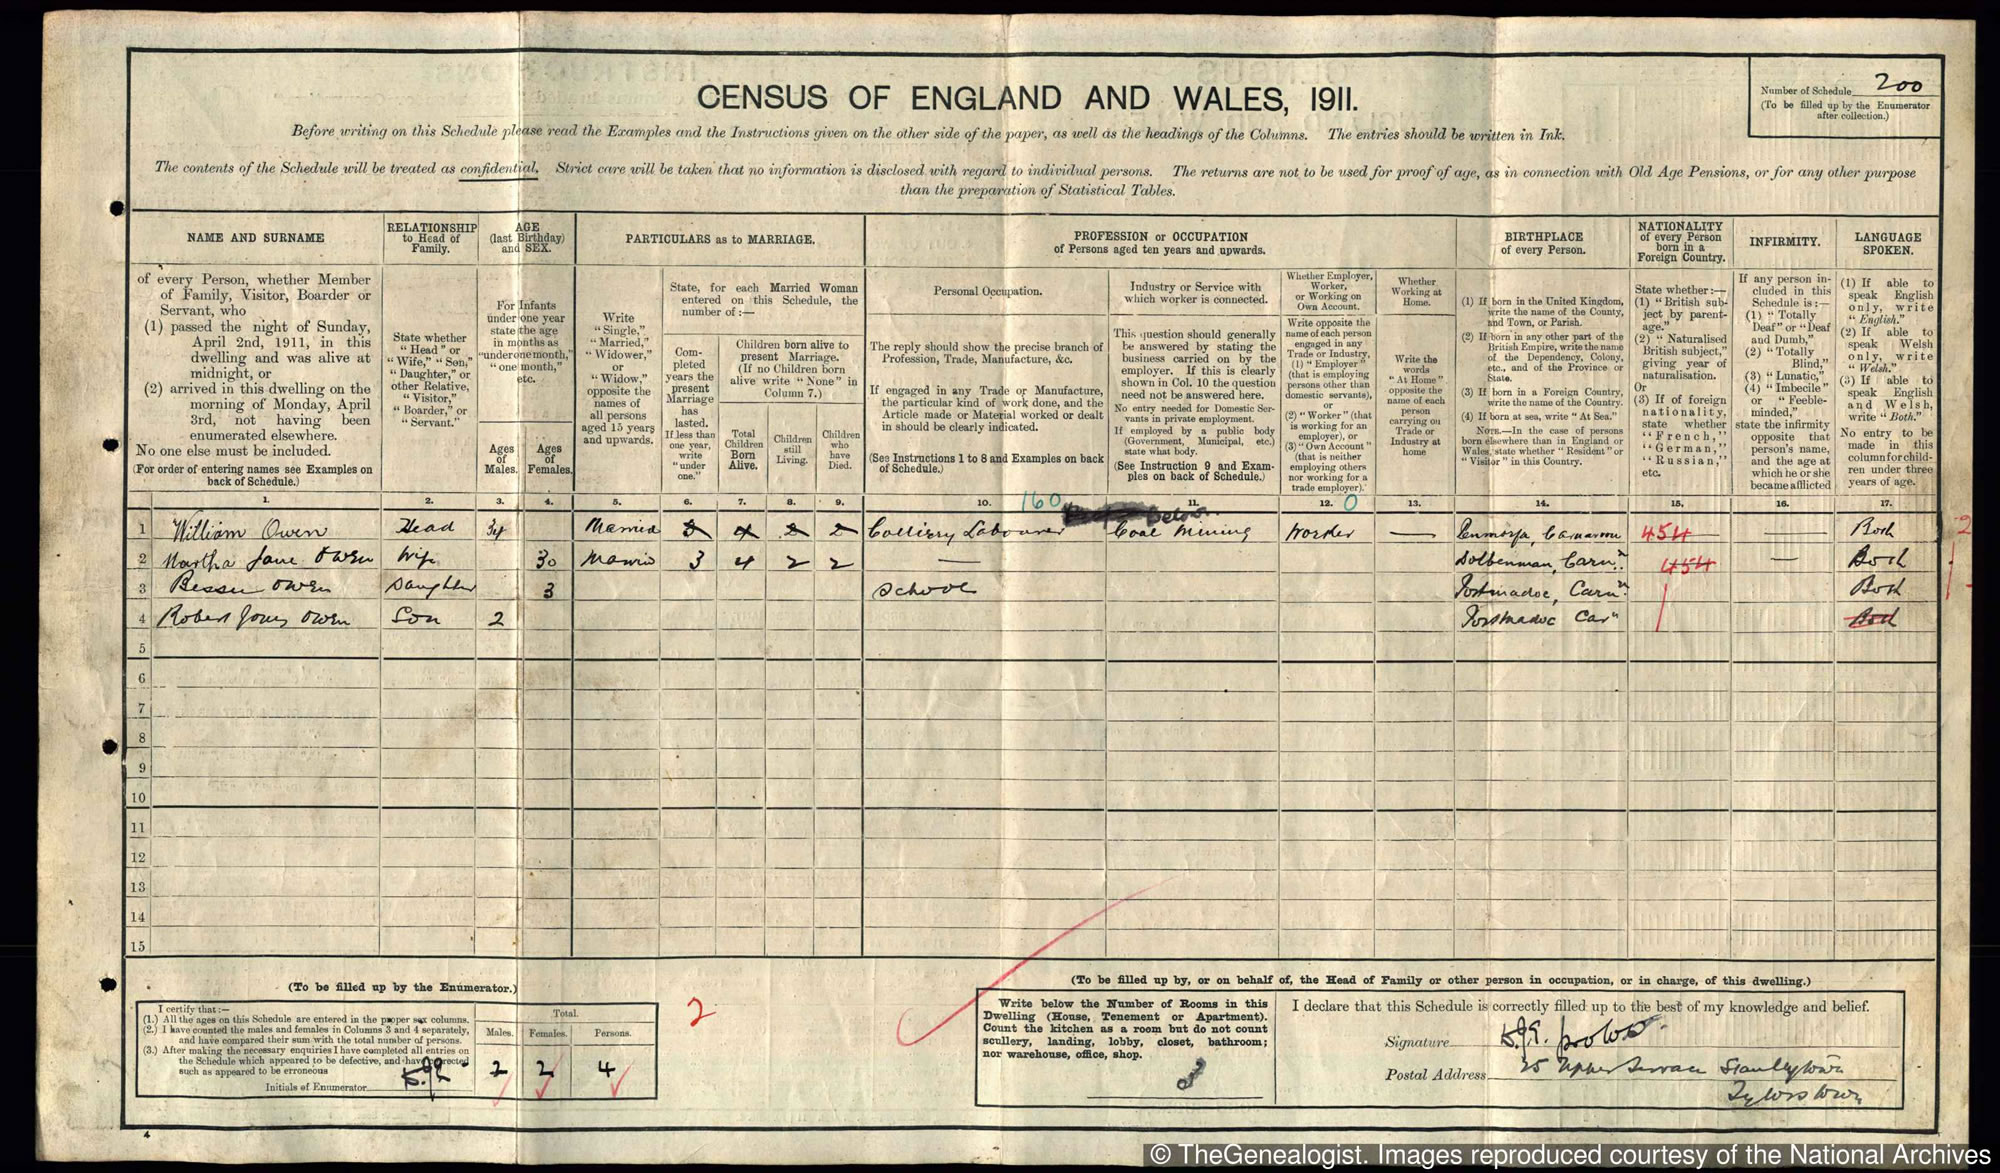 1911 census of Stanleytown reveals William Owen has become a Colliery Labourer